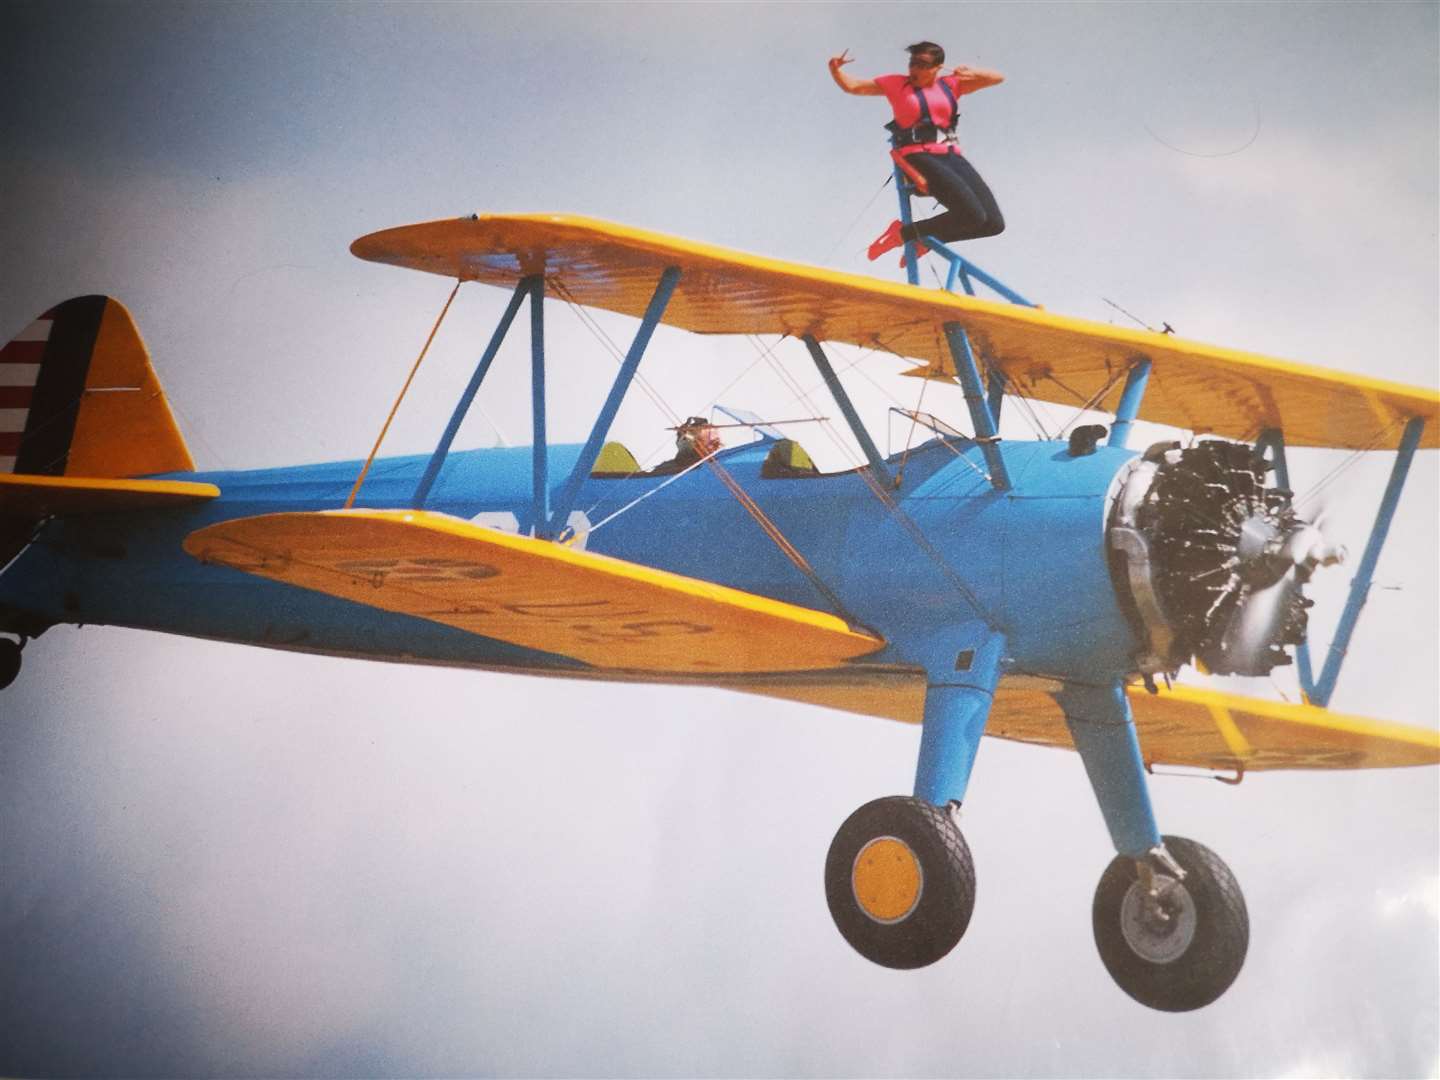 Nicky Clifford is planning a wing walk over Headcorn